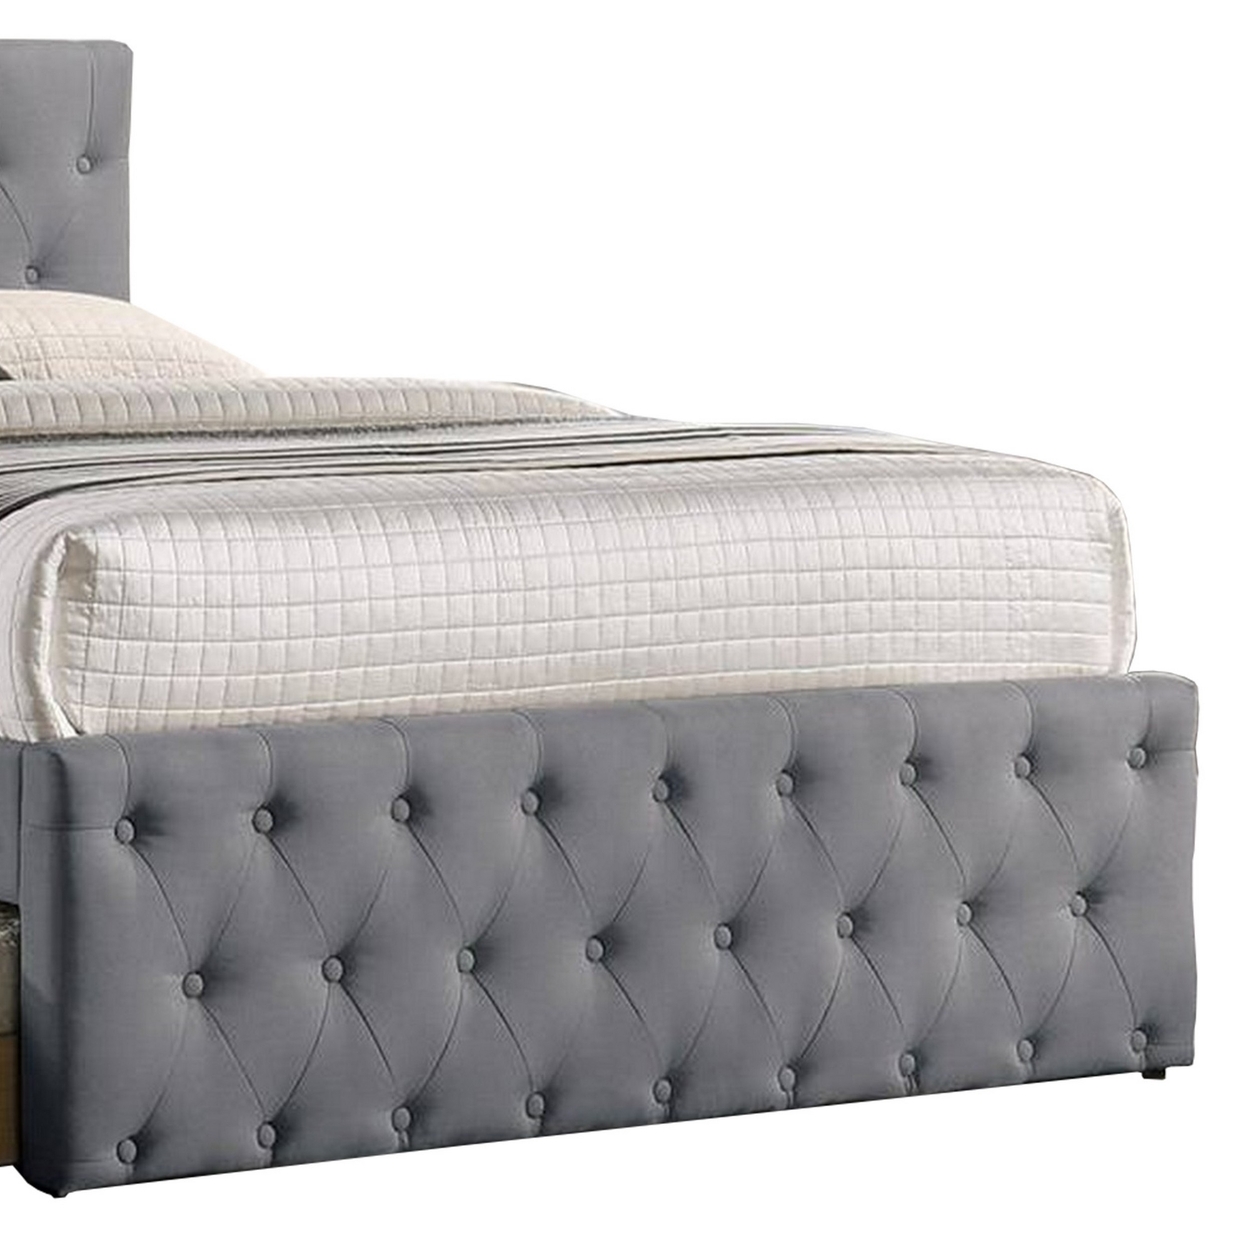 Nek Wood Twin Size Upholstered Bed With Trundle, Tufted Gray Burlap- Saltoro Sherpi